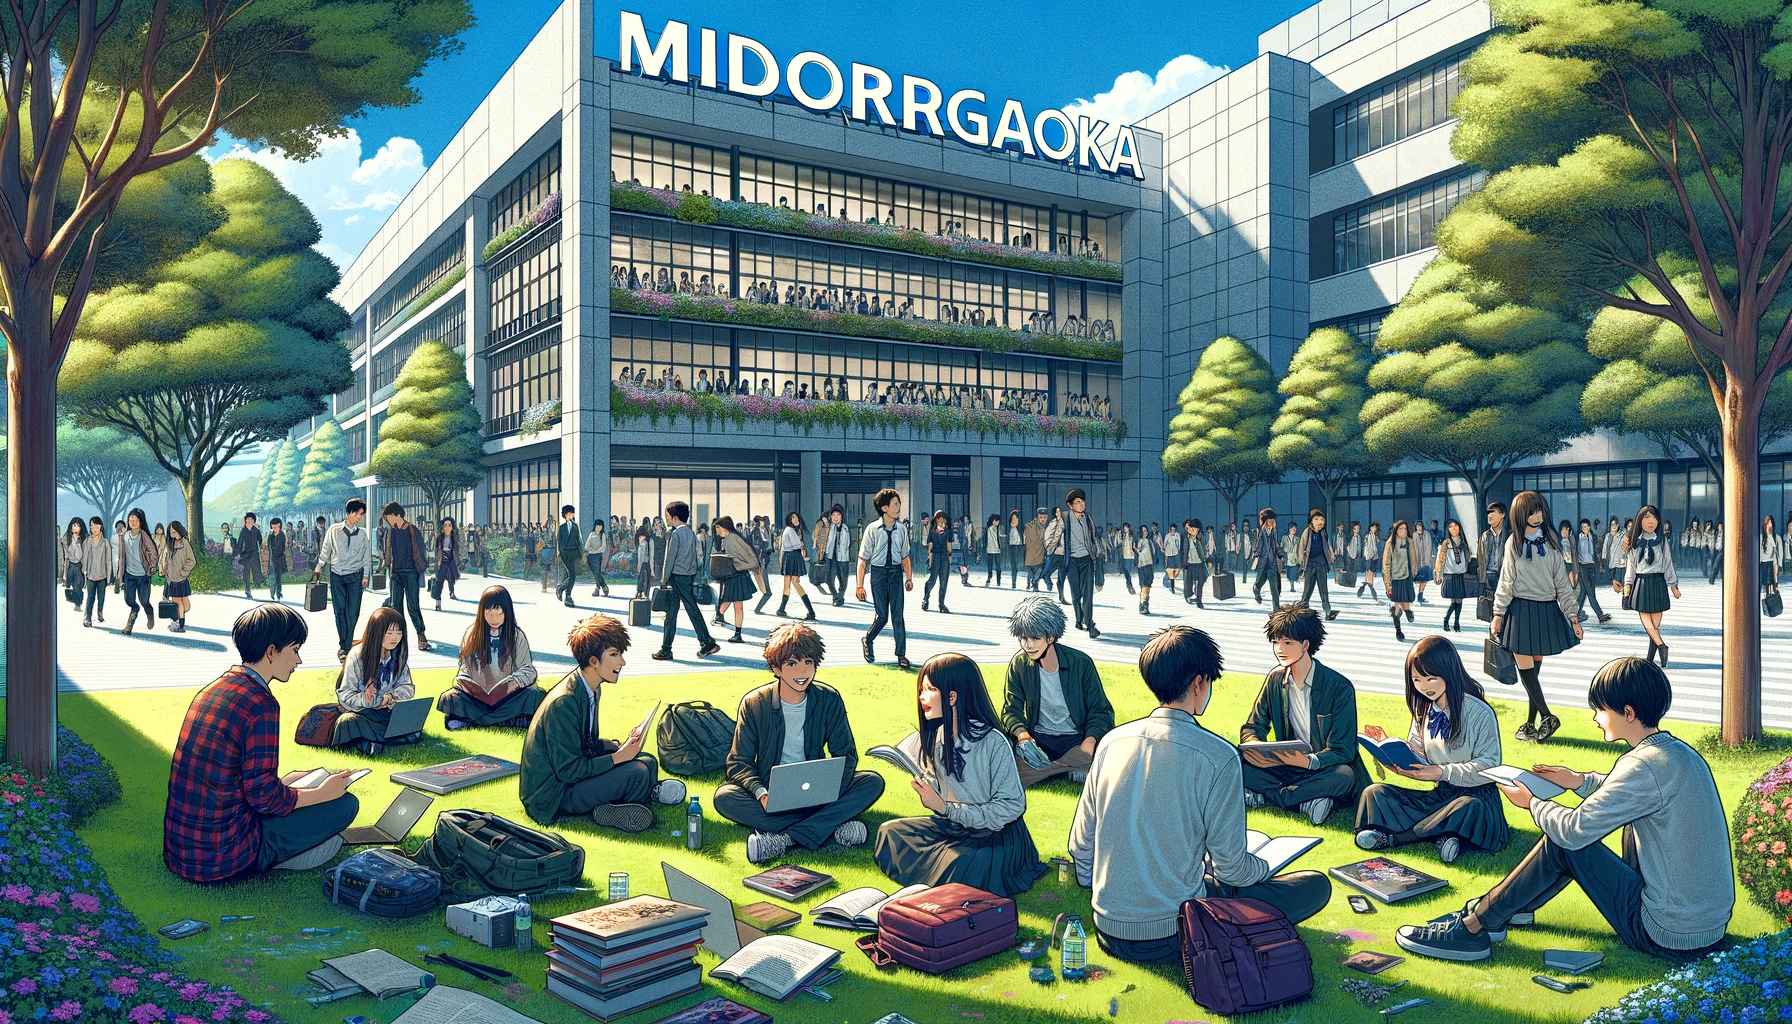 A dynamic scene at Midorigaoka High School focusing specifically on the students, showcasing the school's popularity. The image captures a group of students from diverse backgrounds, actively engaged in a lively discussion outdoors. They are sitting on the grass with books and laptops, under the shade of trees, showcasing a typical day of student life. Some students are walking by, chatting and laughing. The school buildings in the background blend modern and traditional architecture. Prominently, the word 'MIDORIGAOKA' is displayed in bold English letters across the top of the image, highlighting the school's identity.